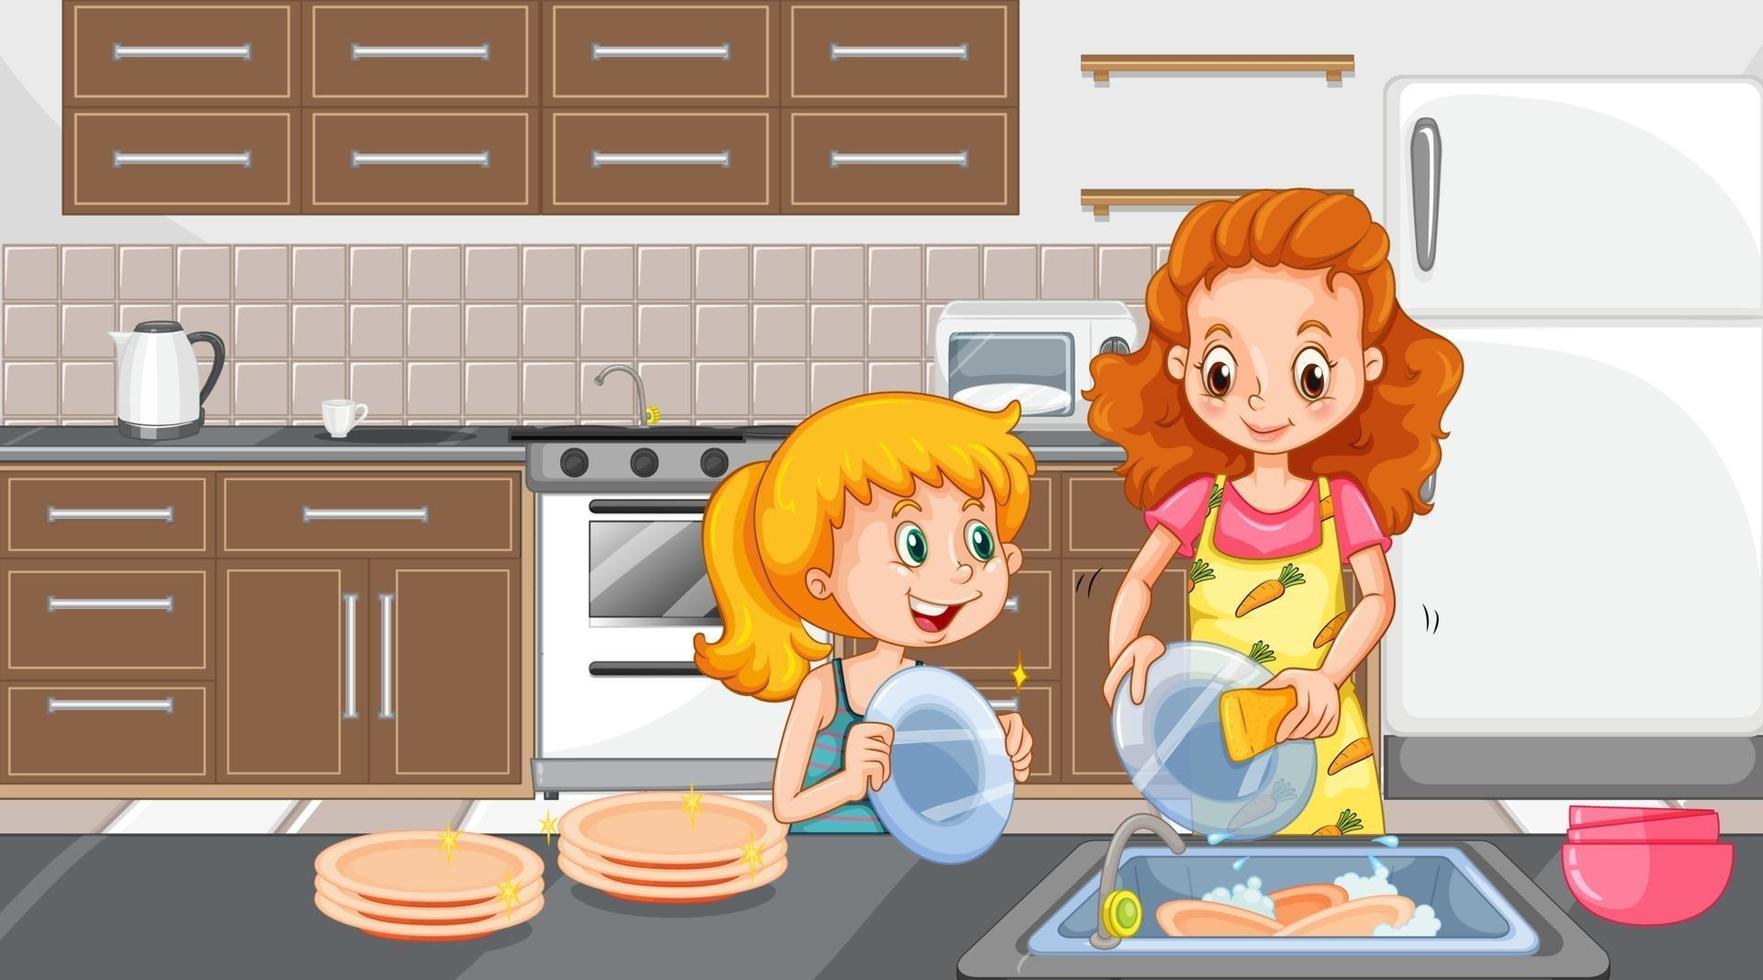 Mother and daughter washing dishes in the kitchen scene vector